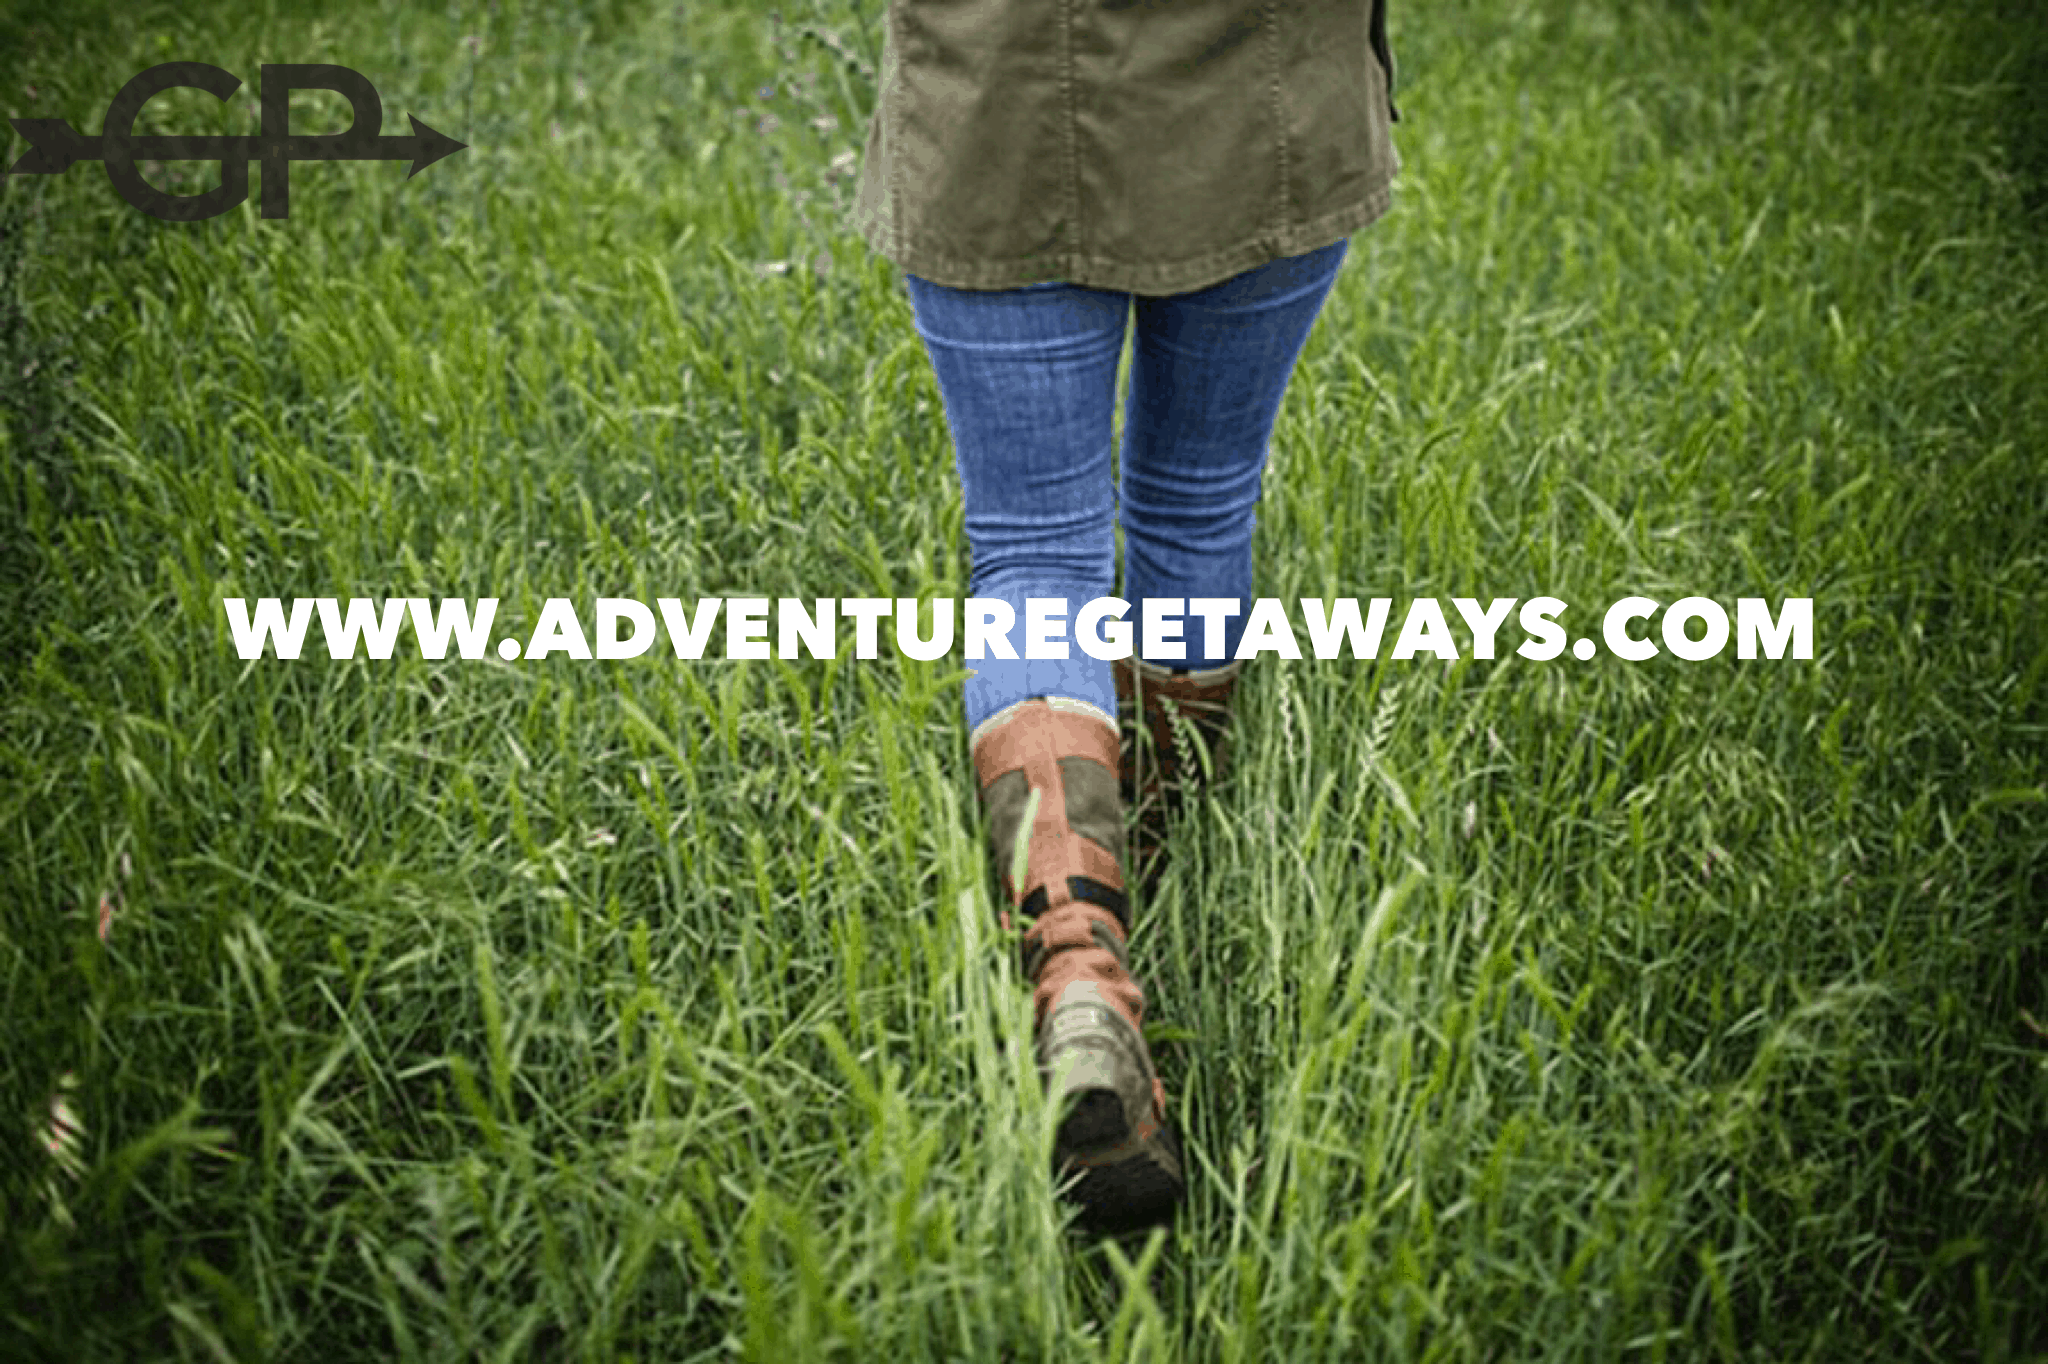 Announcing the Launch of Our New Adventure Getaways Website!